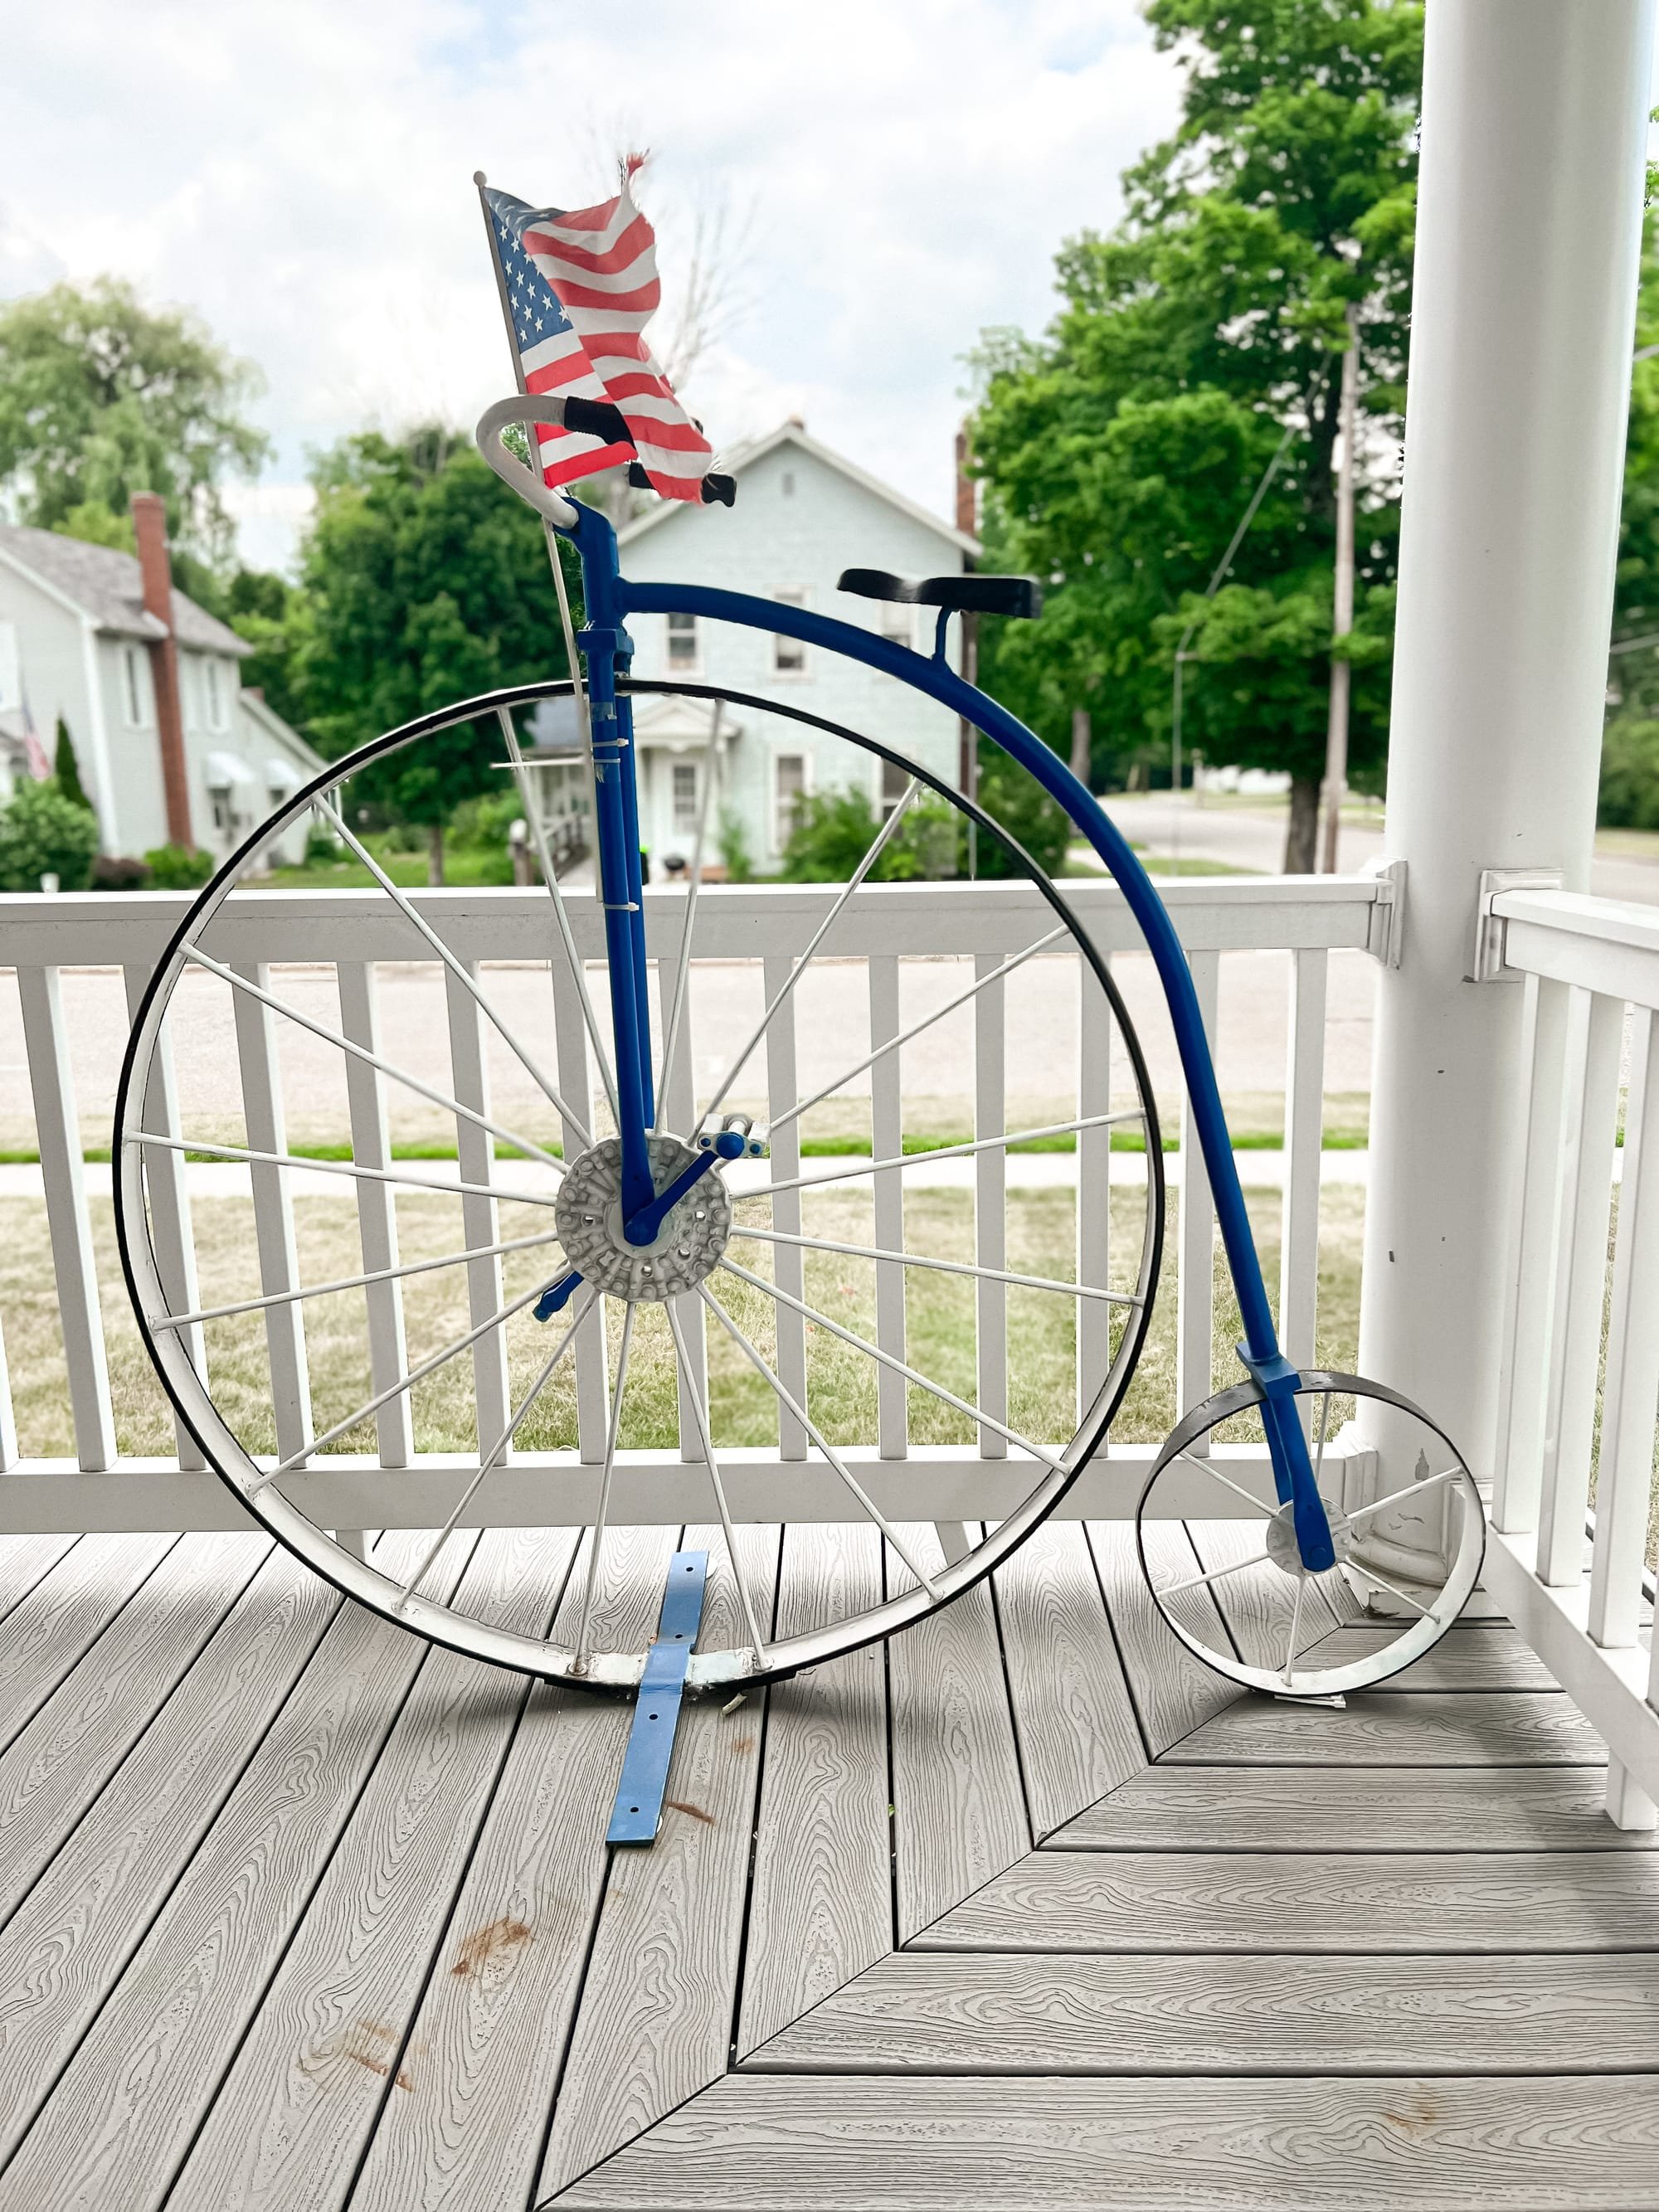 Uncle Sam's bicycle.